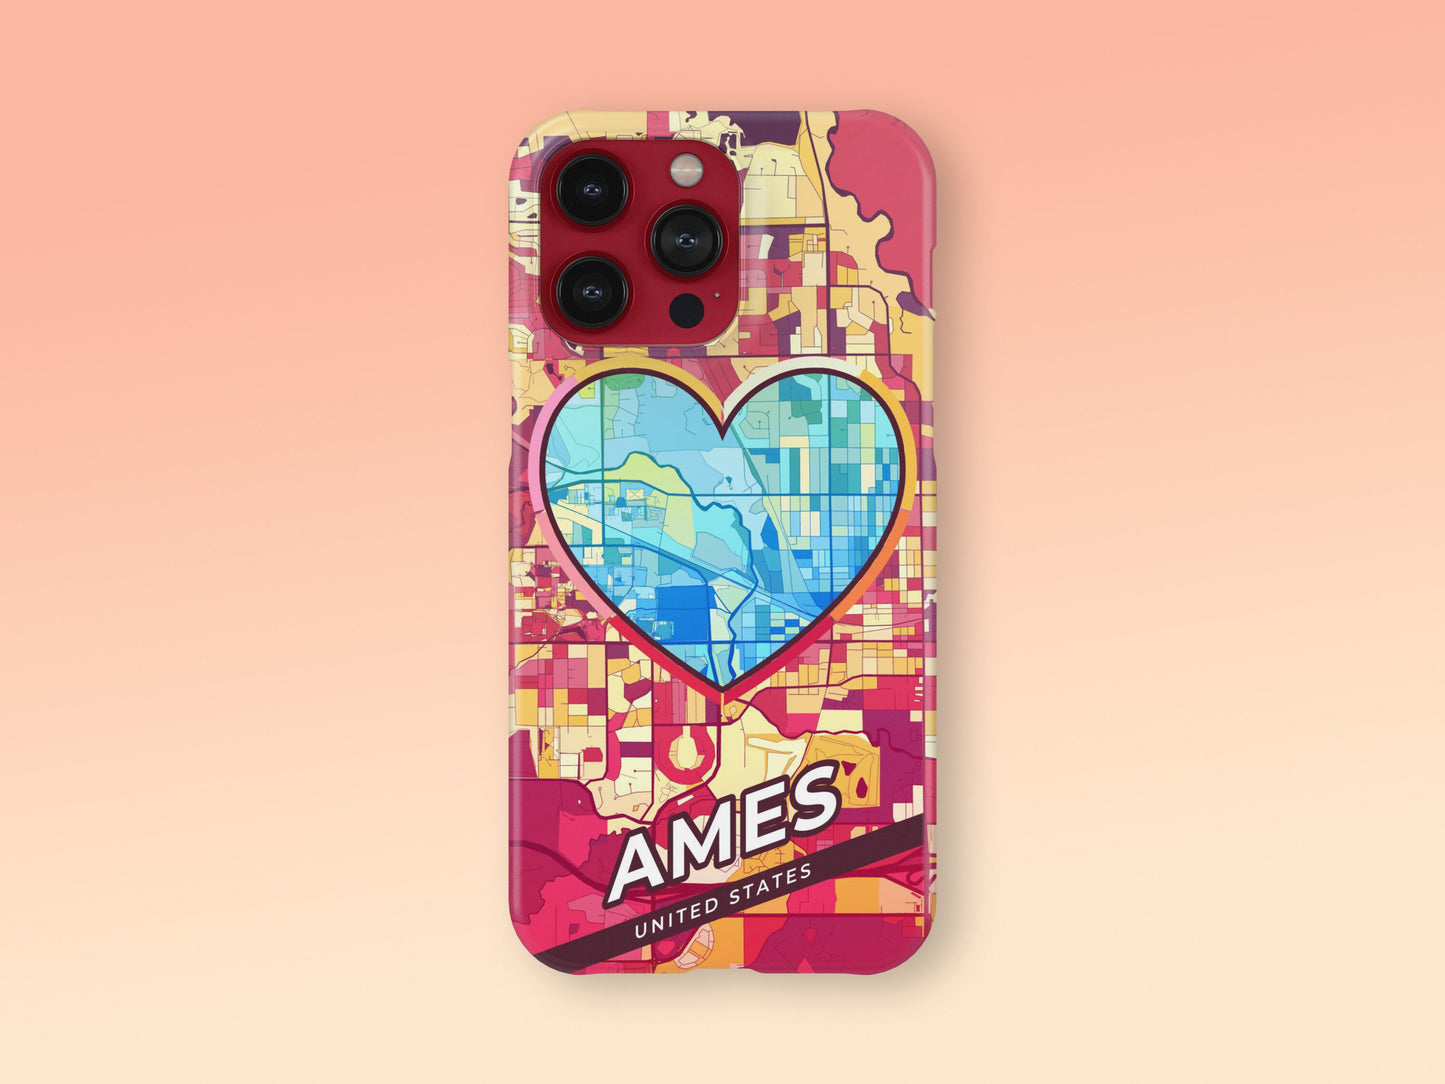 Ames Iowa slim phone case with colorful icon. Birthday, wedding or housewarming gift. Couple match cases. 2